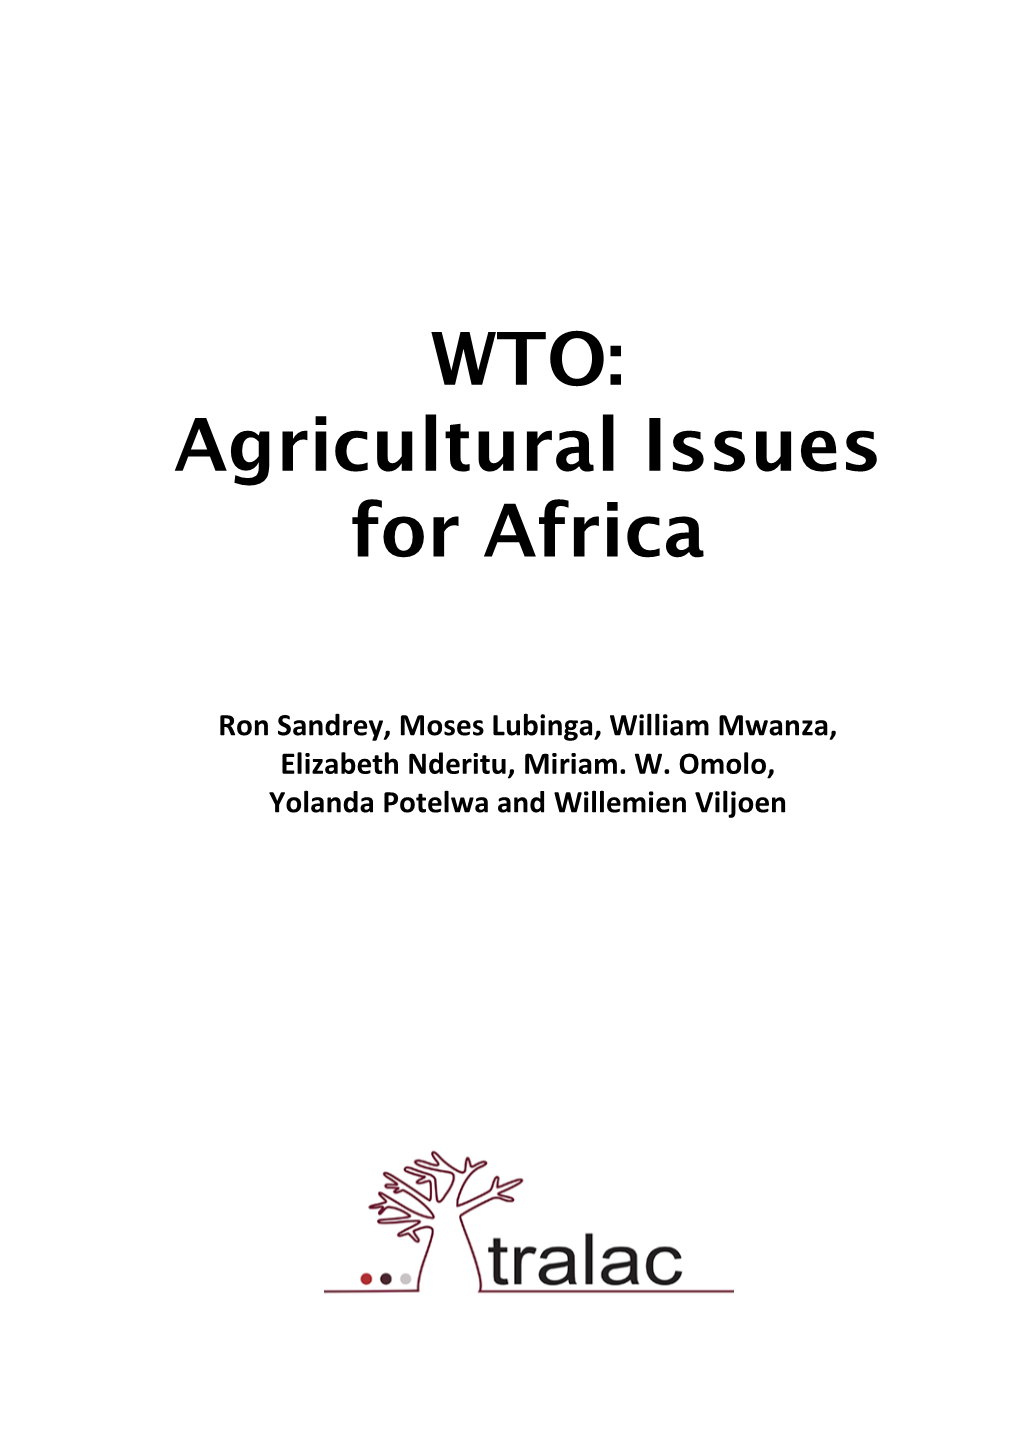 WTO: Agricultural Issues for Africa